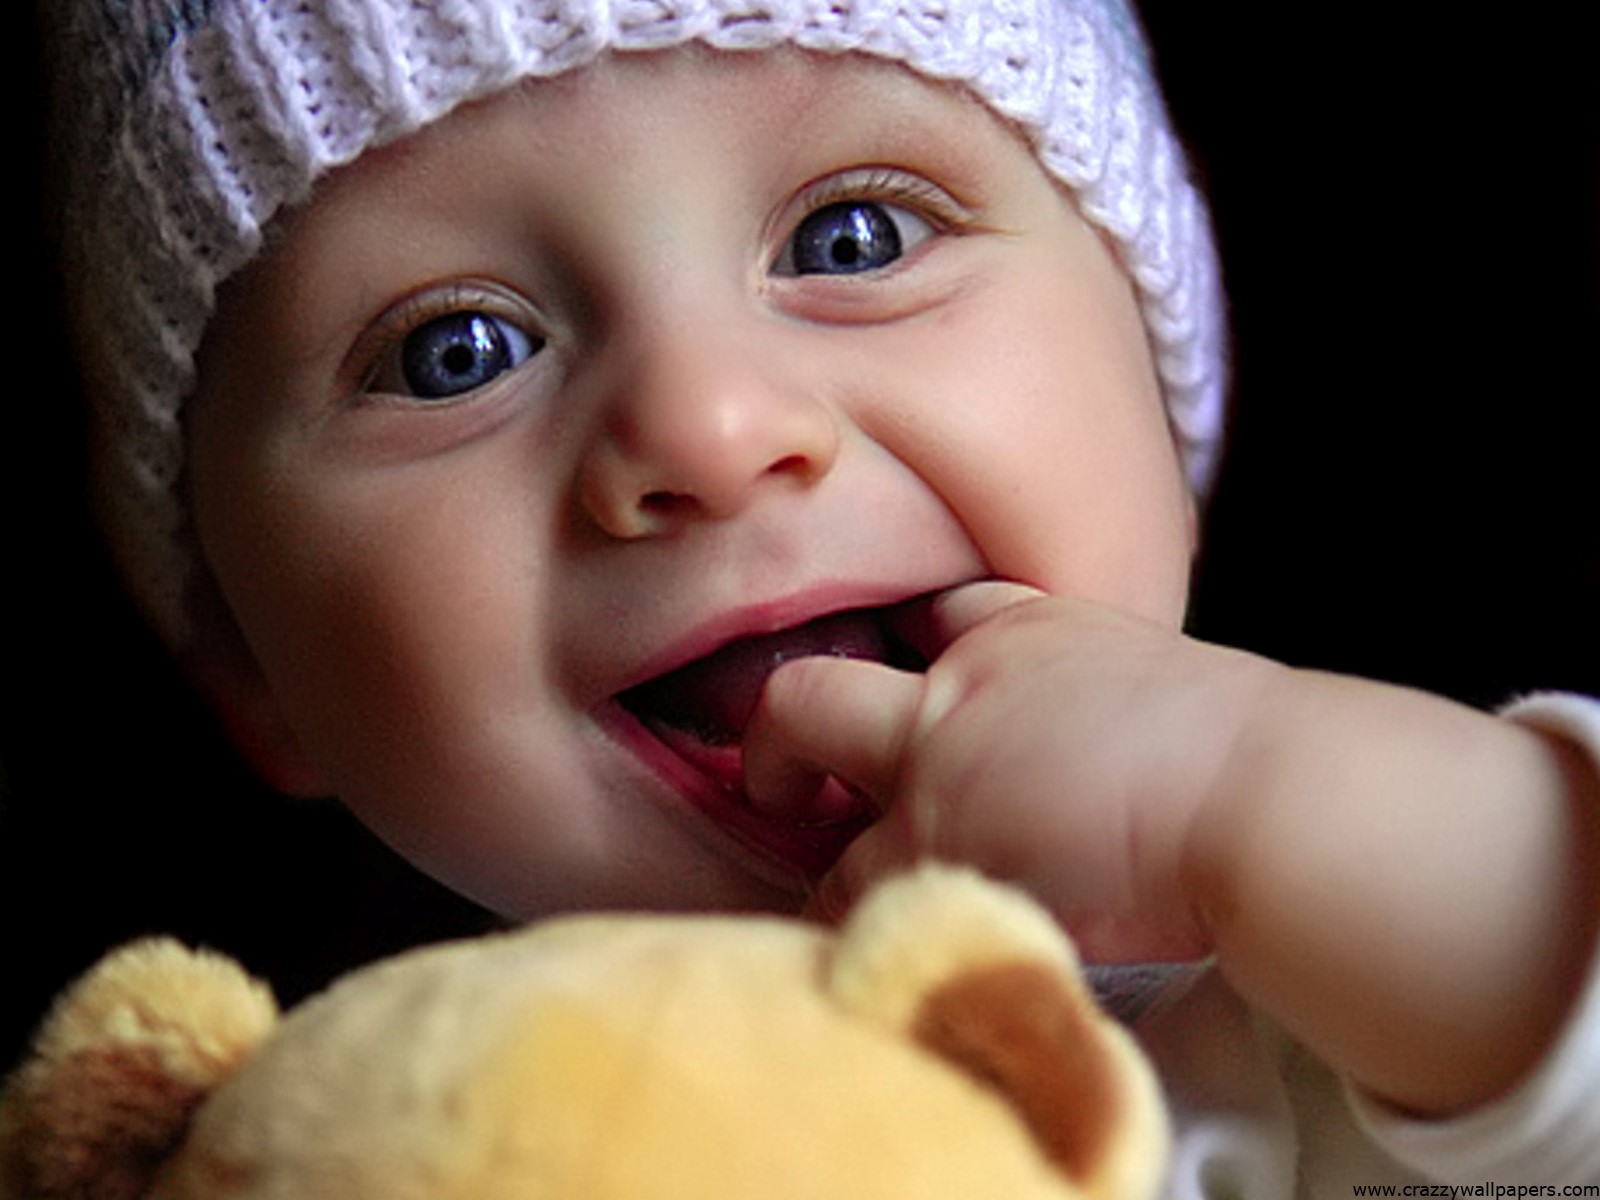 Cute Baby Child Playing with Doll Wallpaper | HD Wallpapers